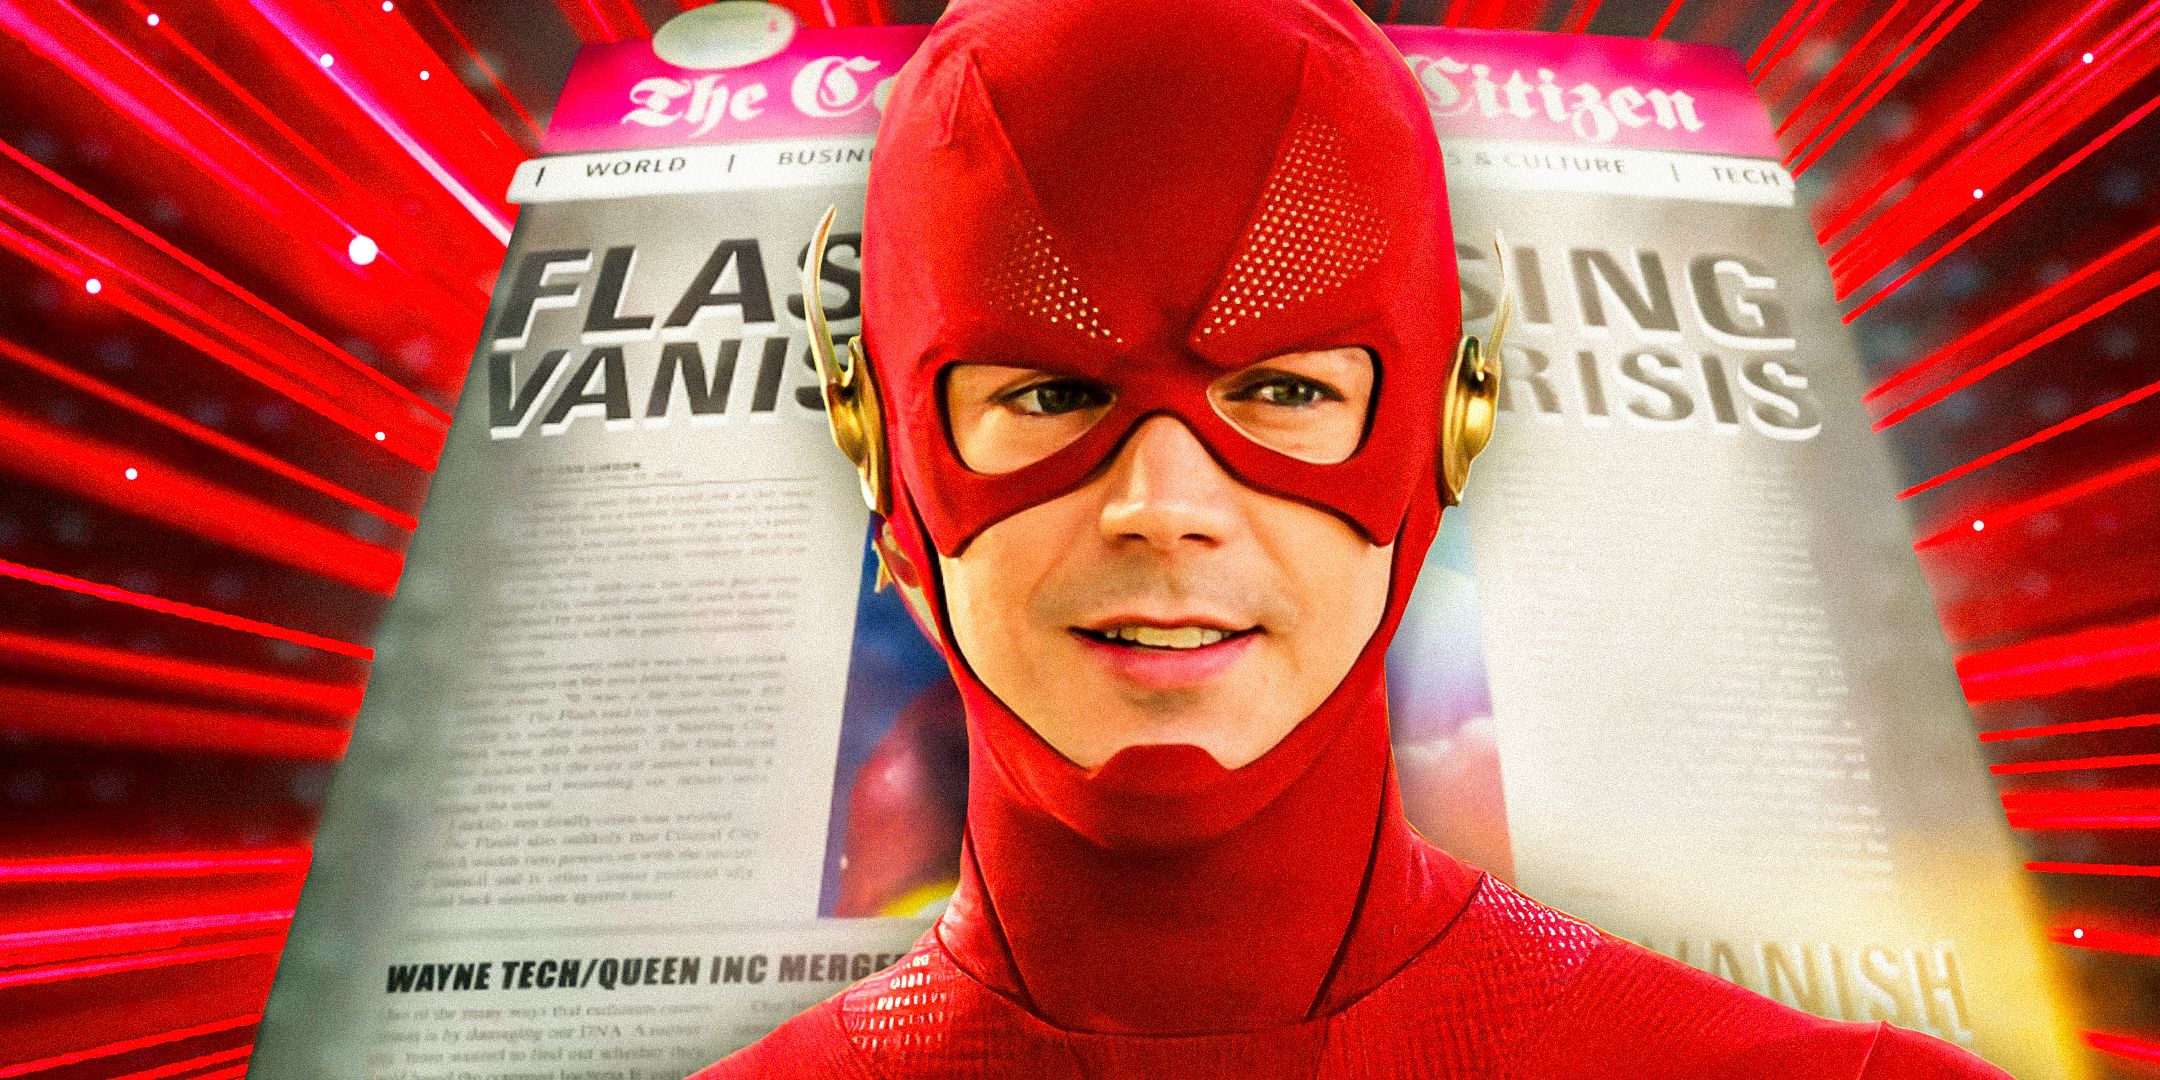 Grant Gustin As The Flash In Front Of Newspaper Headline About The Flash Vanishing In Crisis